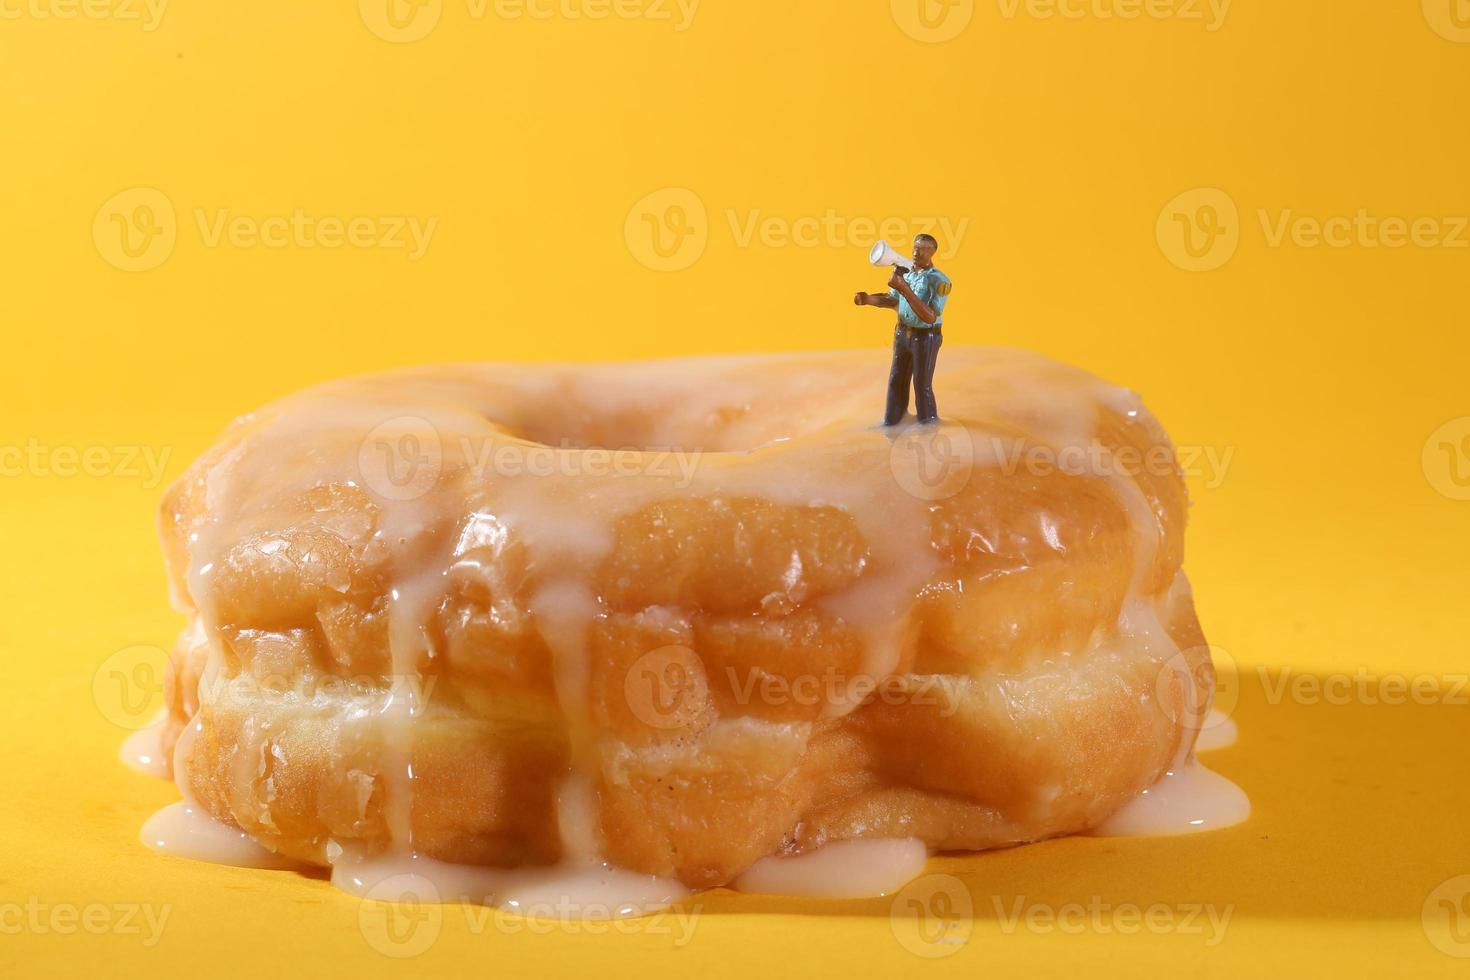 Police Officers in Conceptual Food Imagery With Donuts photo